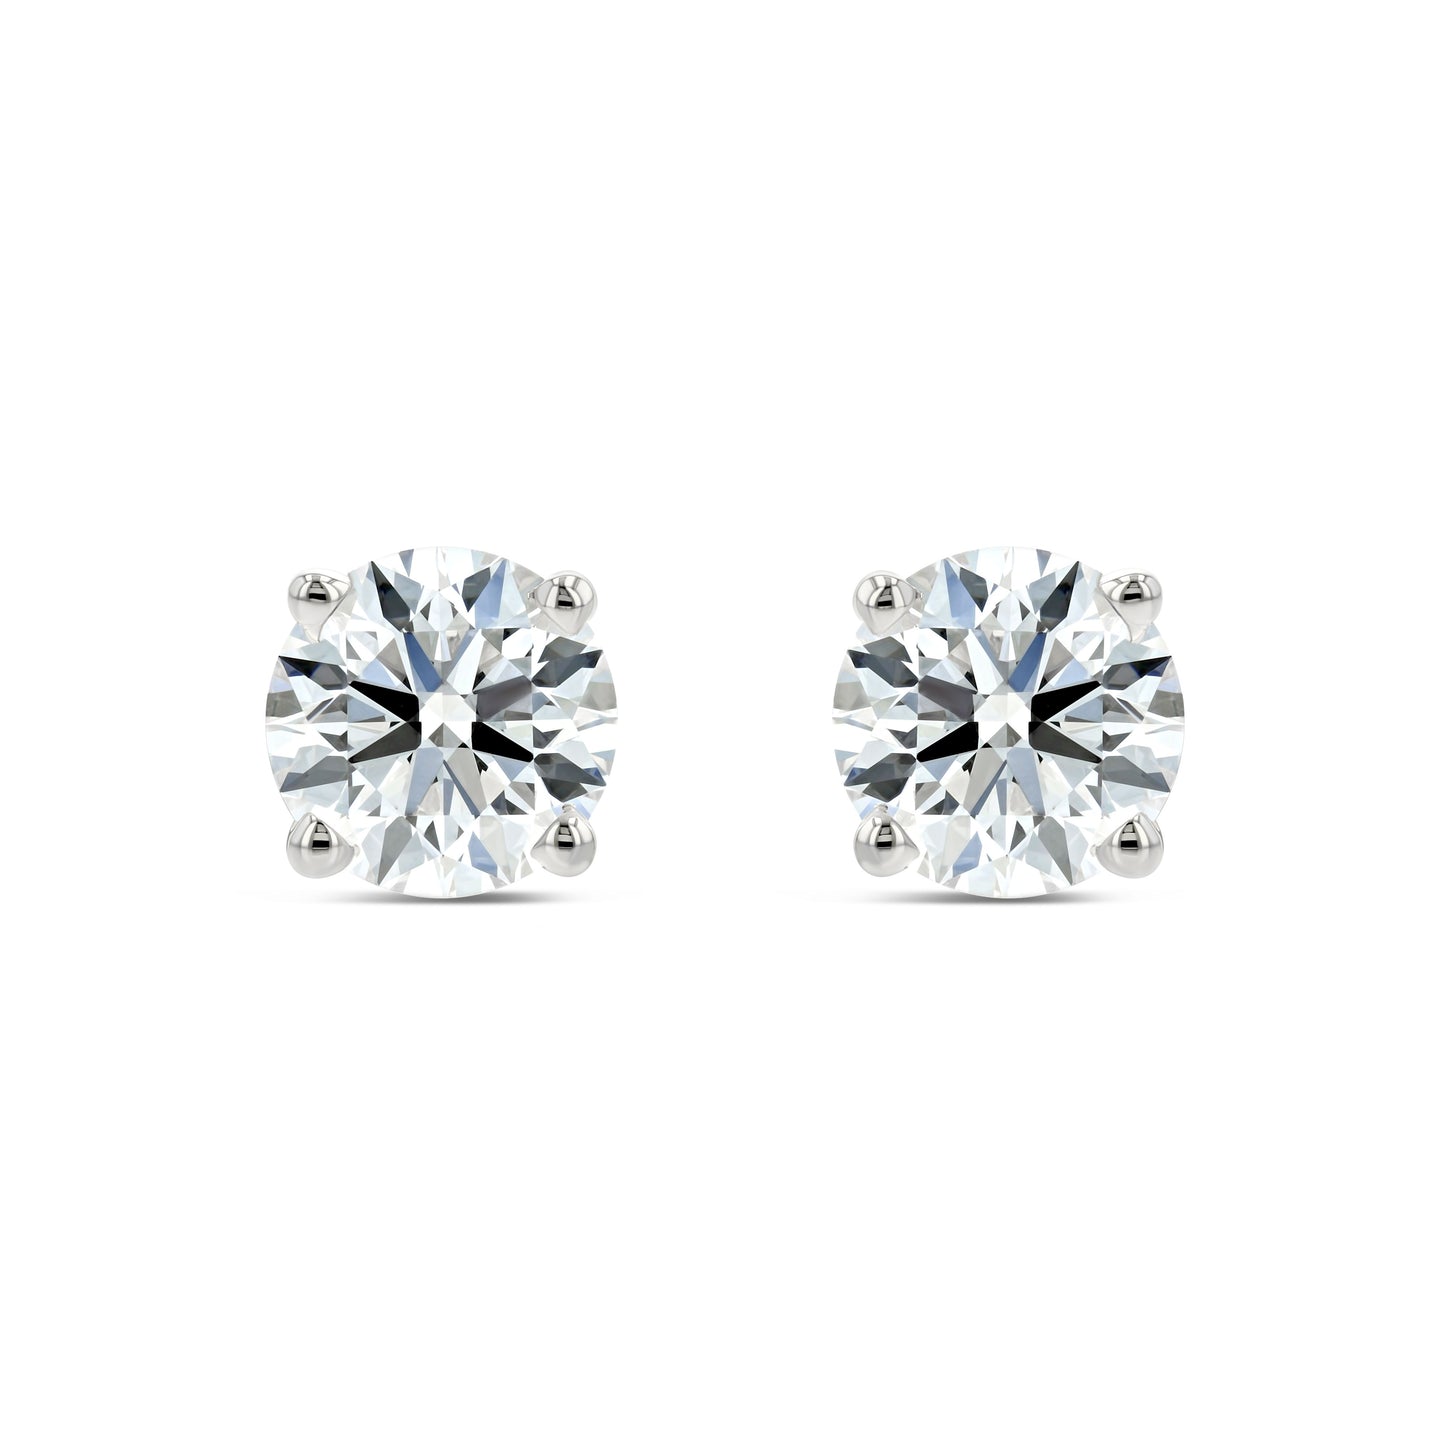 18k White Gold 4-prong Round Diamond Stud Earrings 1ctw (5.00mm Ea), H Color, Si3-i1 Clarity